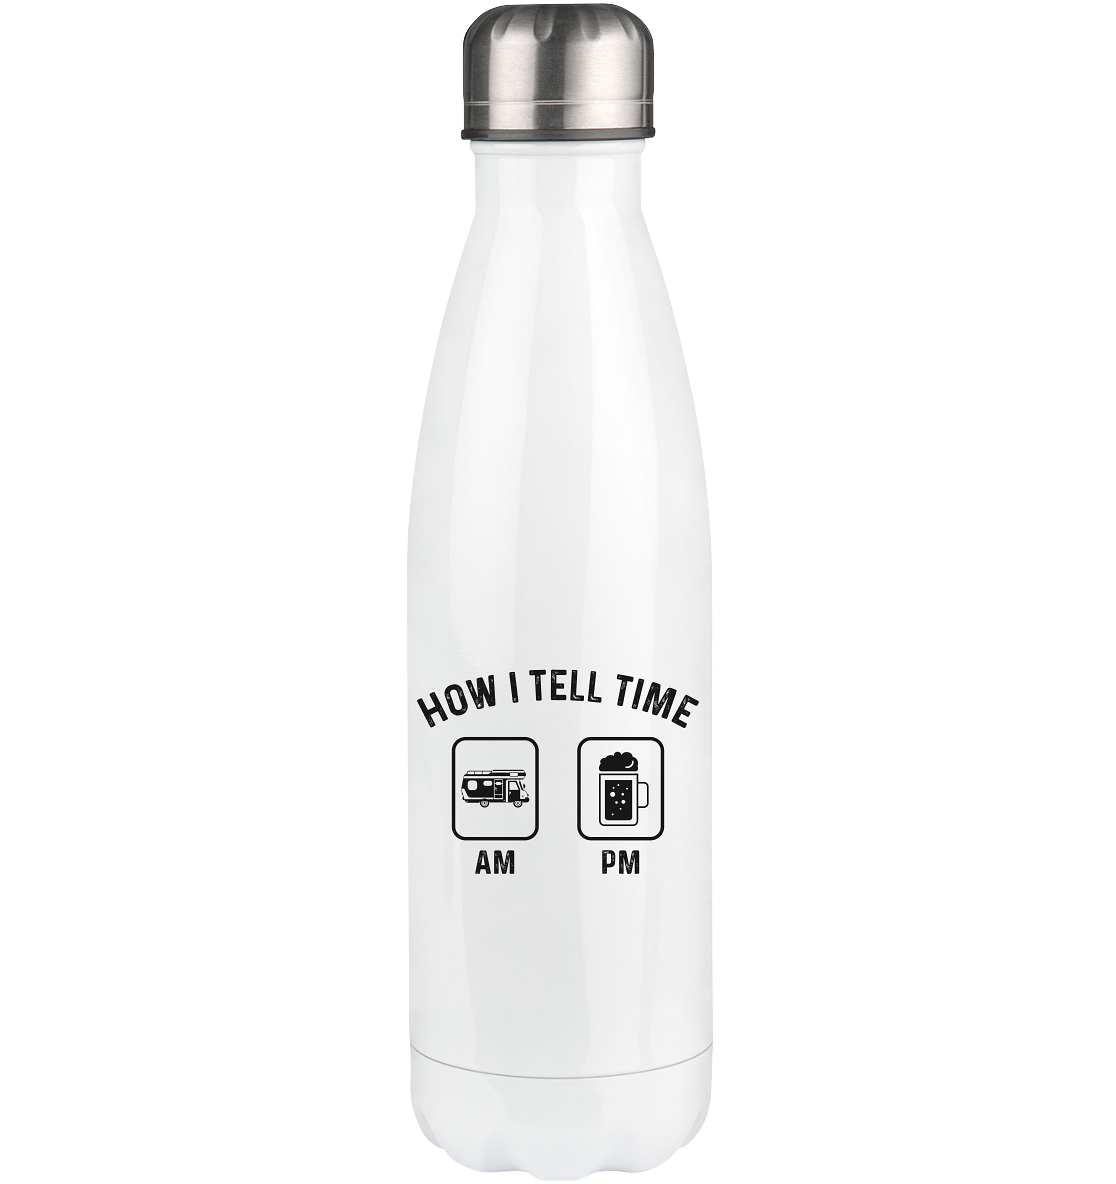 How I Tell Time Am Pm - Edelstahl Thermosflasche camping 500ml